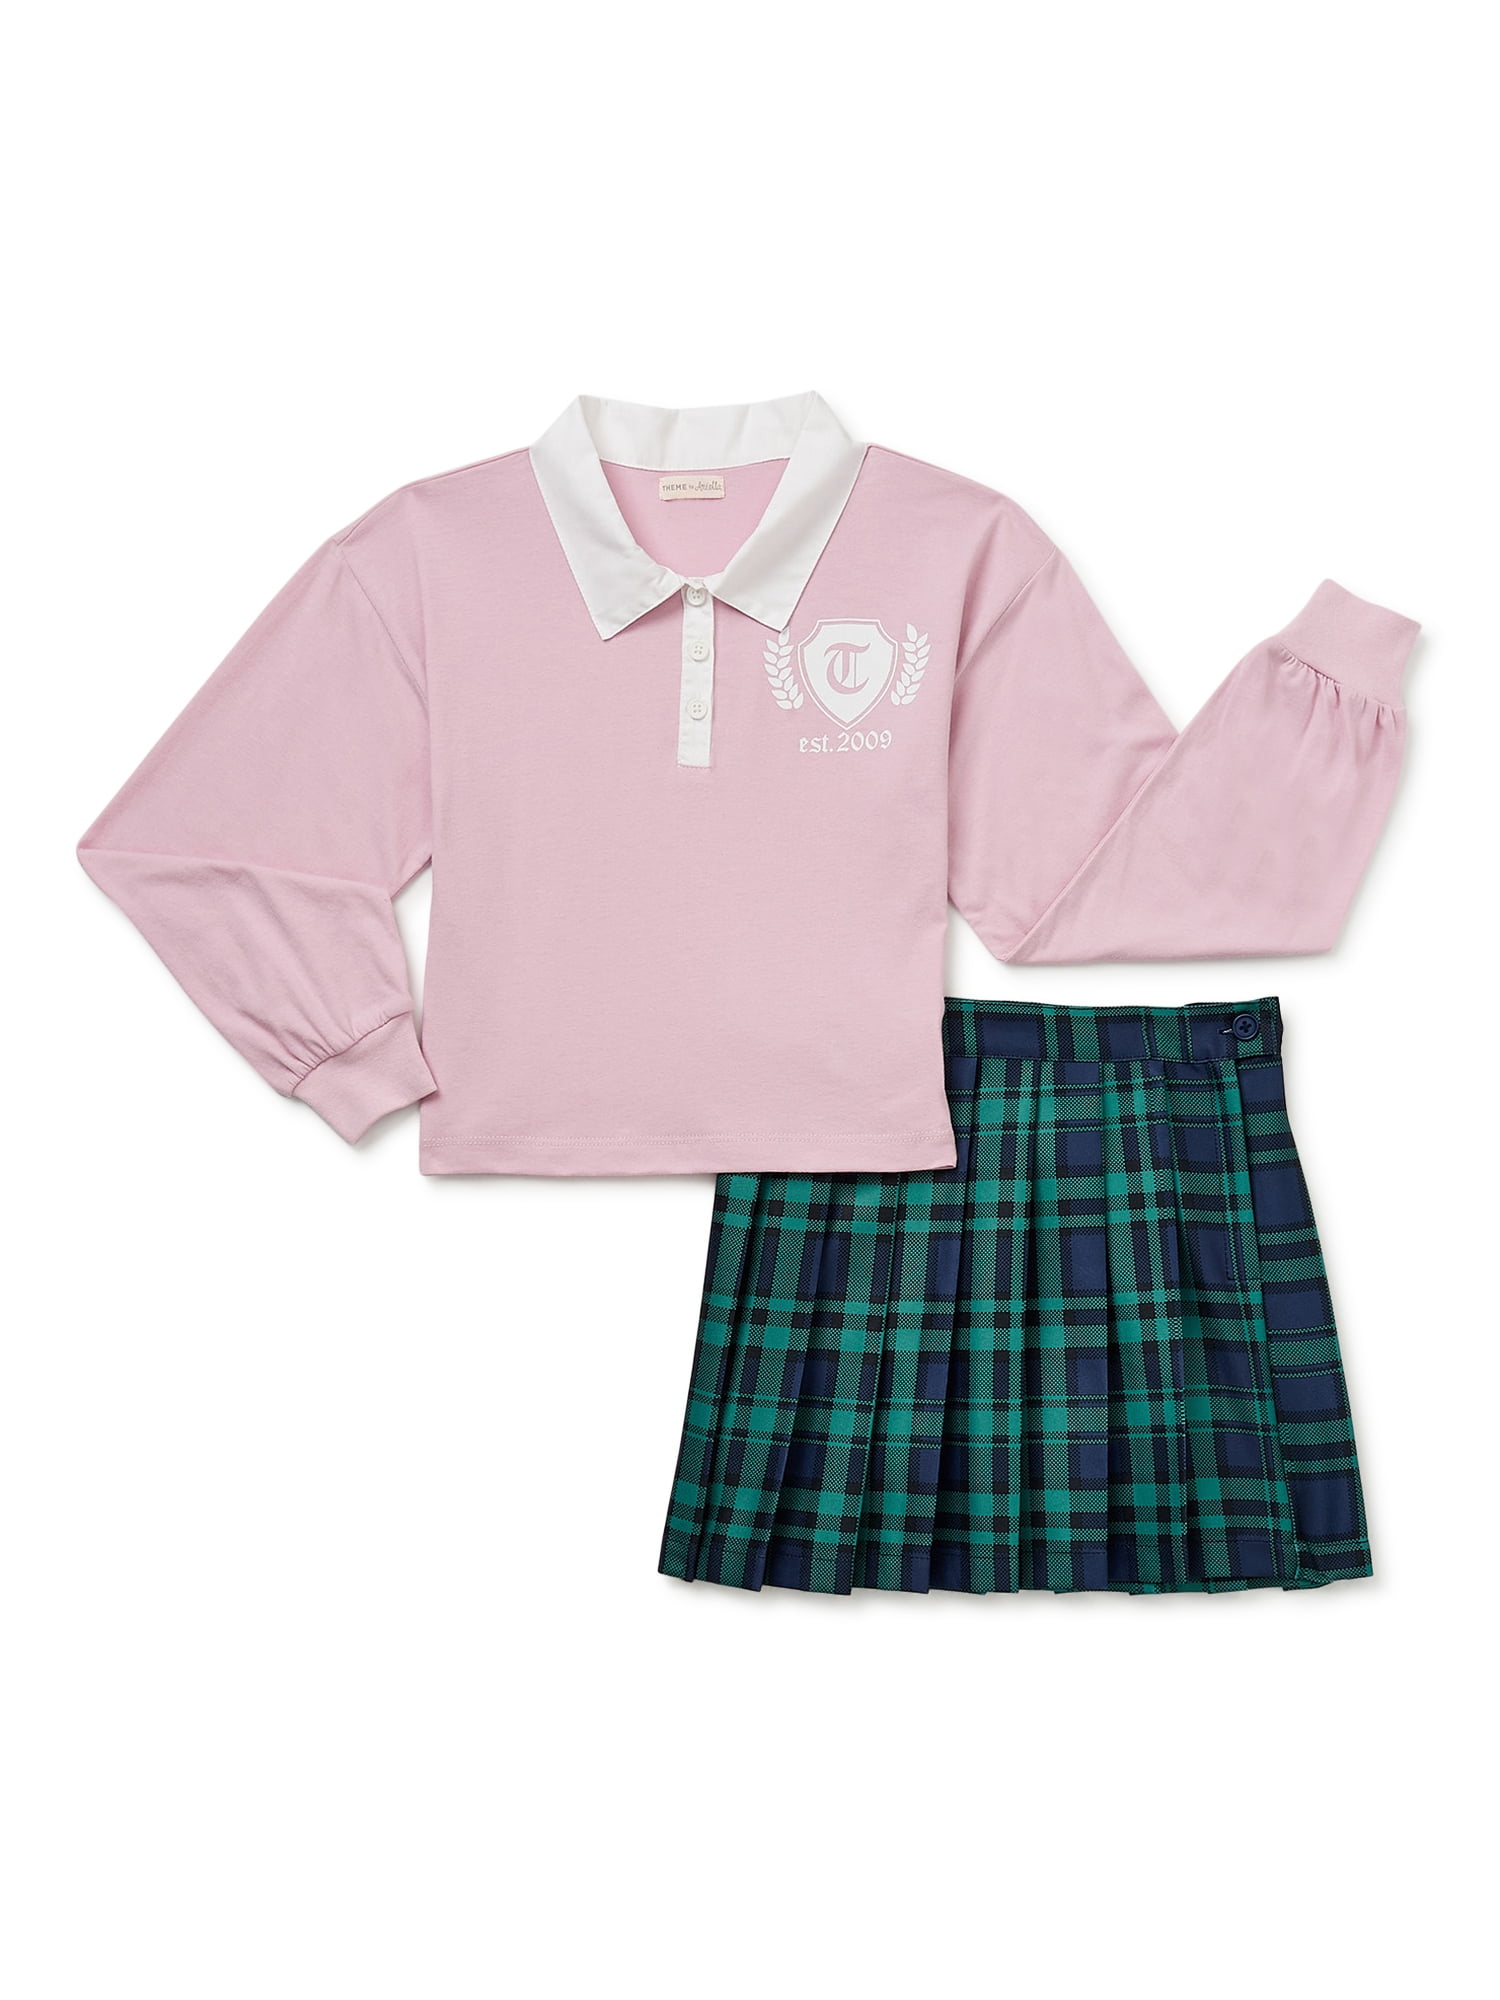 Theme By Ariella Girls Jersey Rugby Top and Pleated Skirt Set, 2